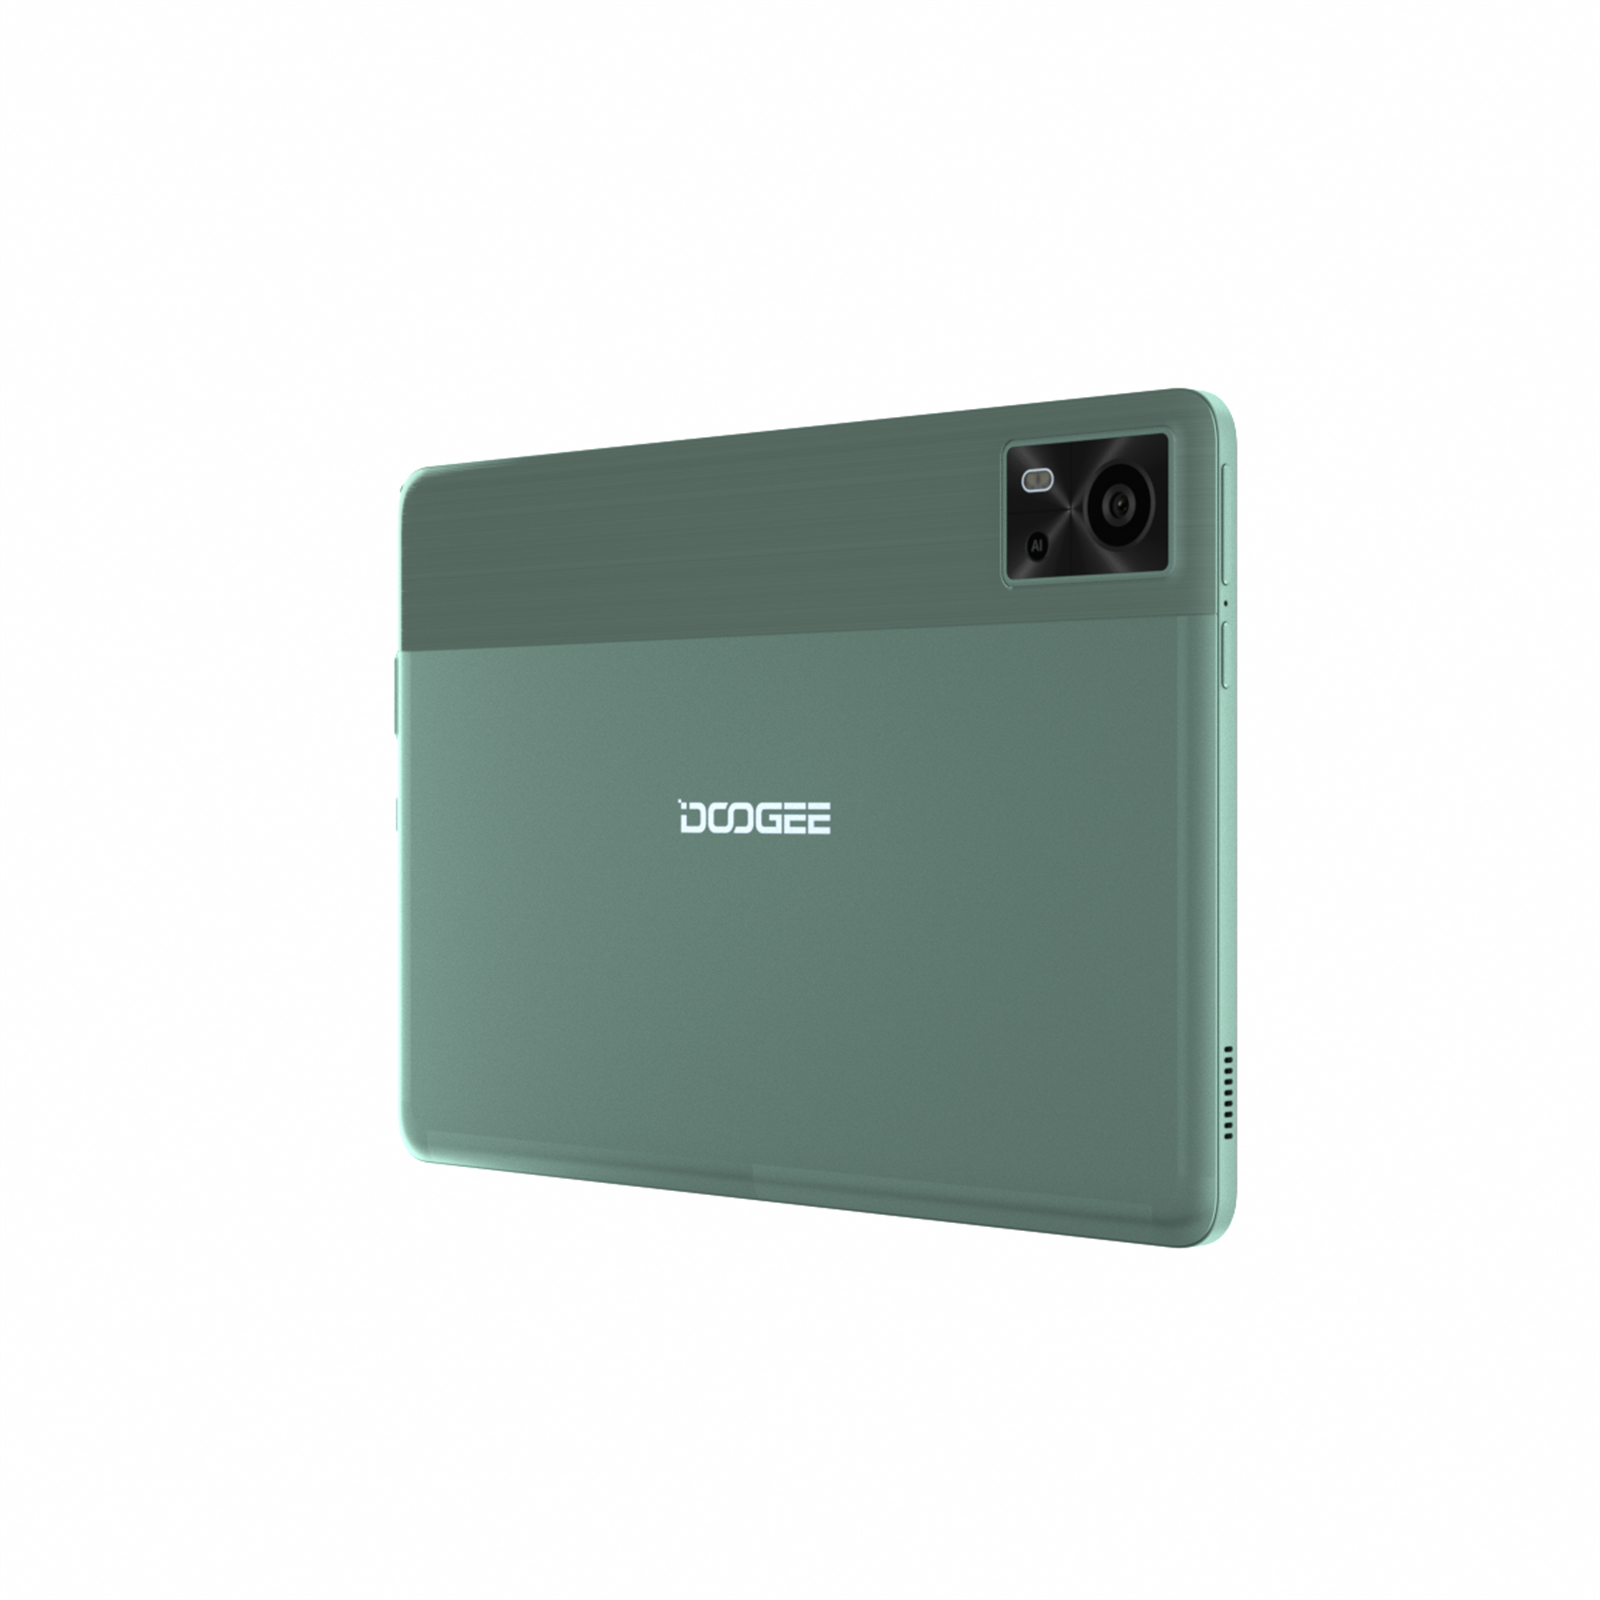 Doogee T10E pictures, official photos